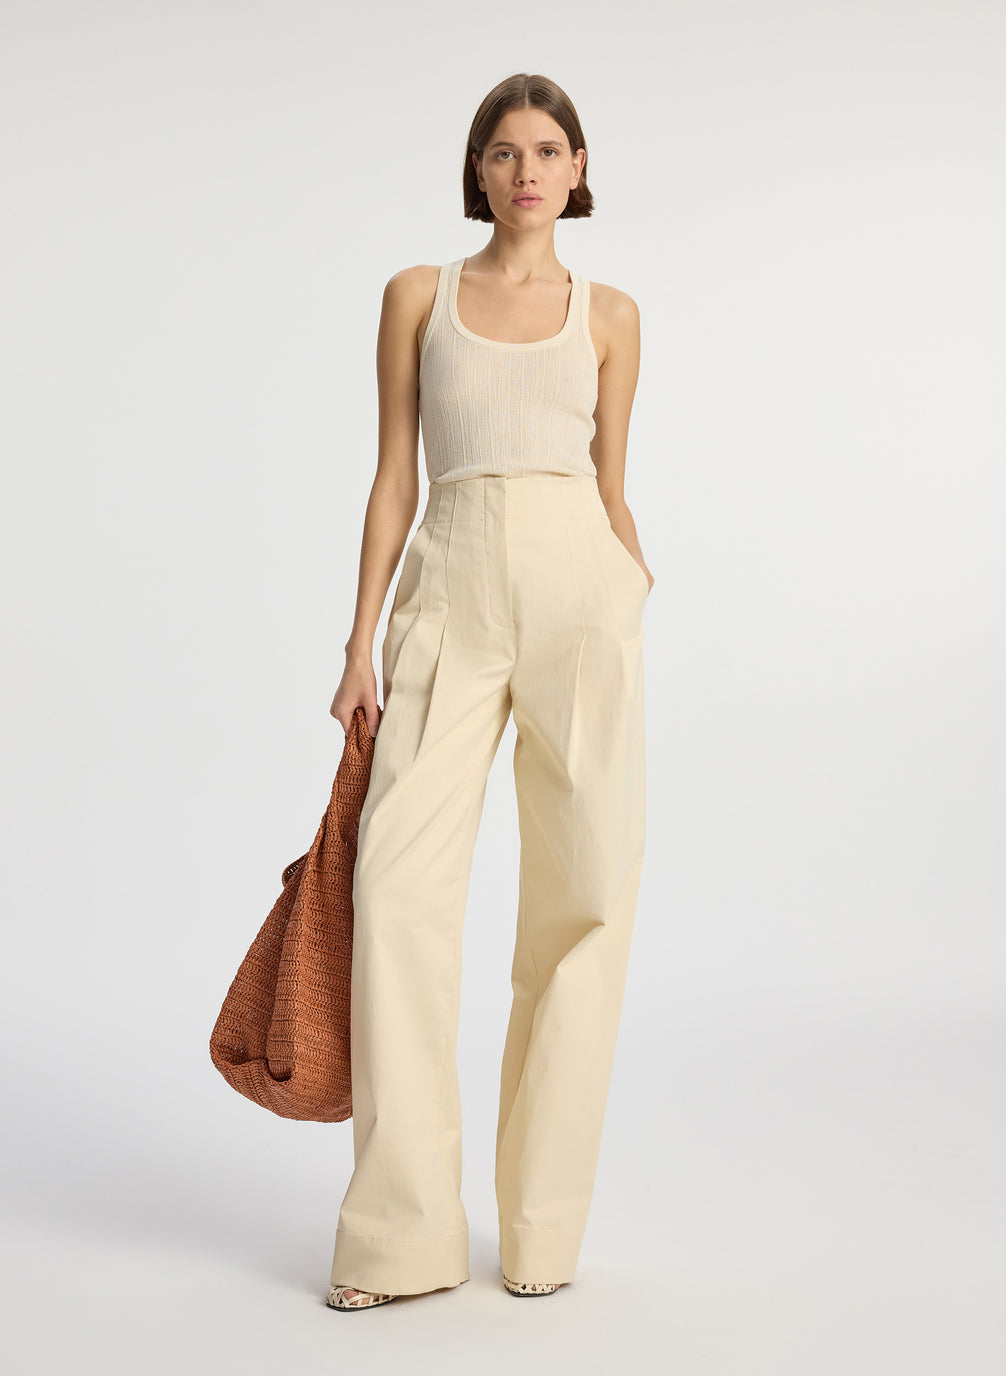 front  view of woman wearing cream tank top and beige sateen wide leg pants